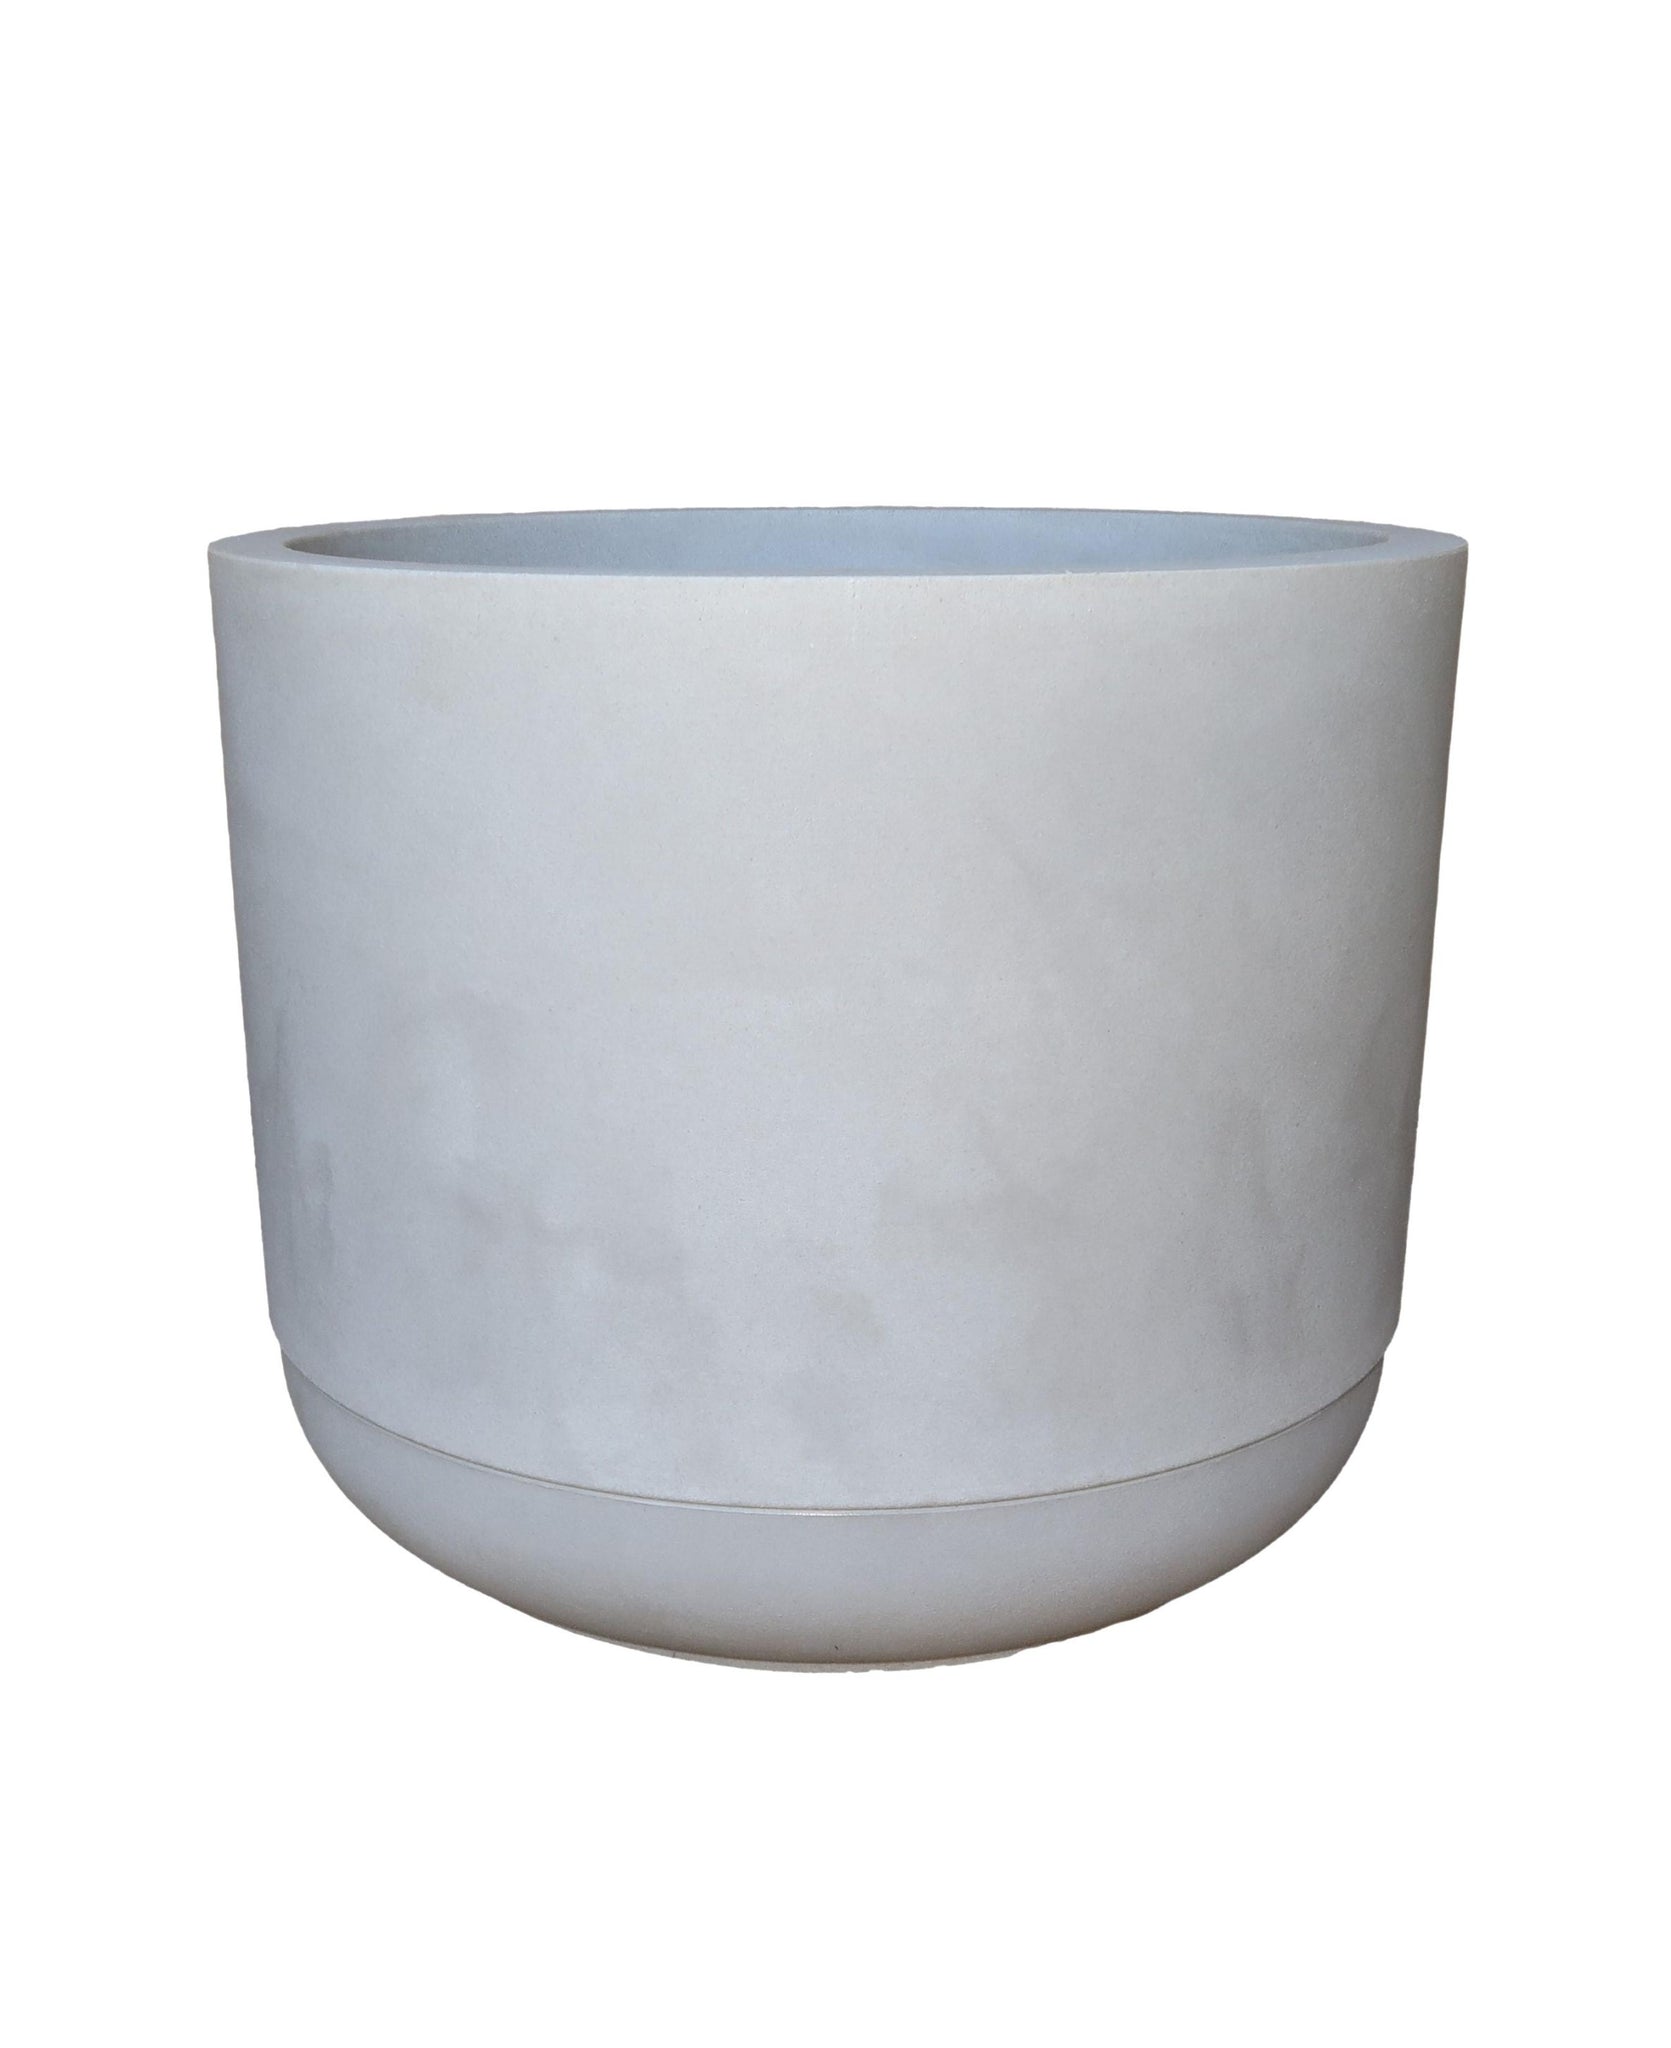 Stylish plant pots with drip trays. Smooth finish. Modern. Indoor or outdoor.  Lightweight poly carbon